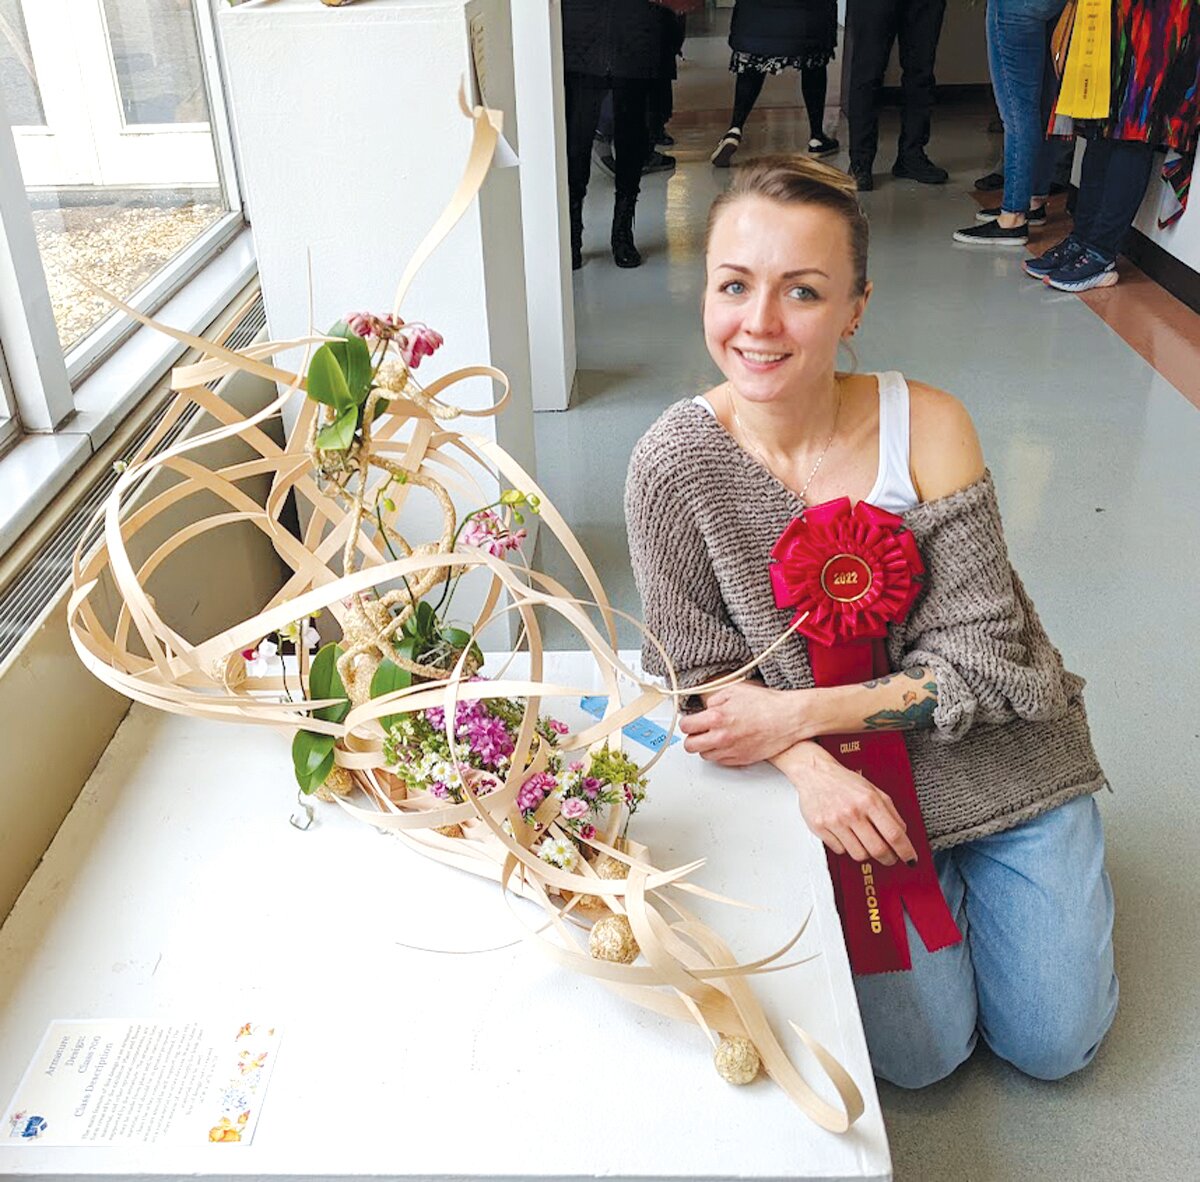 Svetlana Bespalov, CFD with her second place award-winning showpiece entry for the “Armature” class in last year’s “Art That Blooms” contest. She also won first place in the Designer of the Year contest last year.